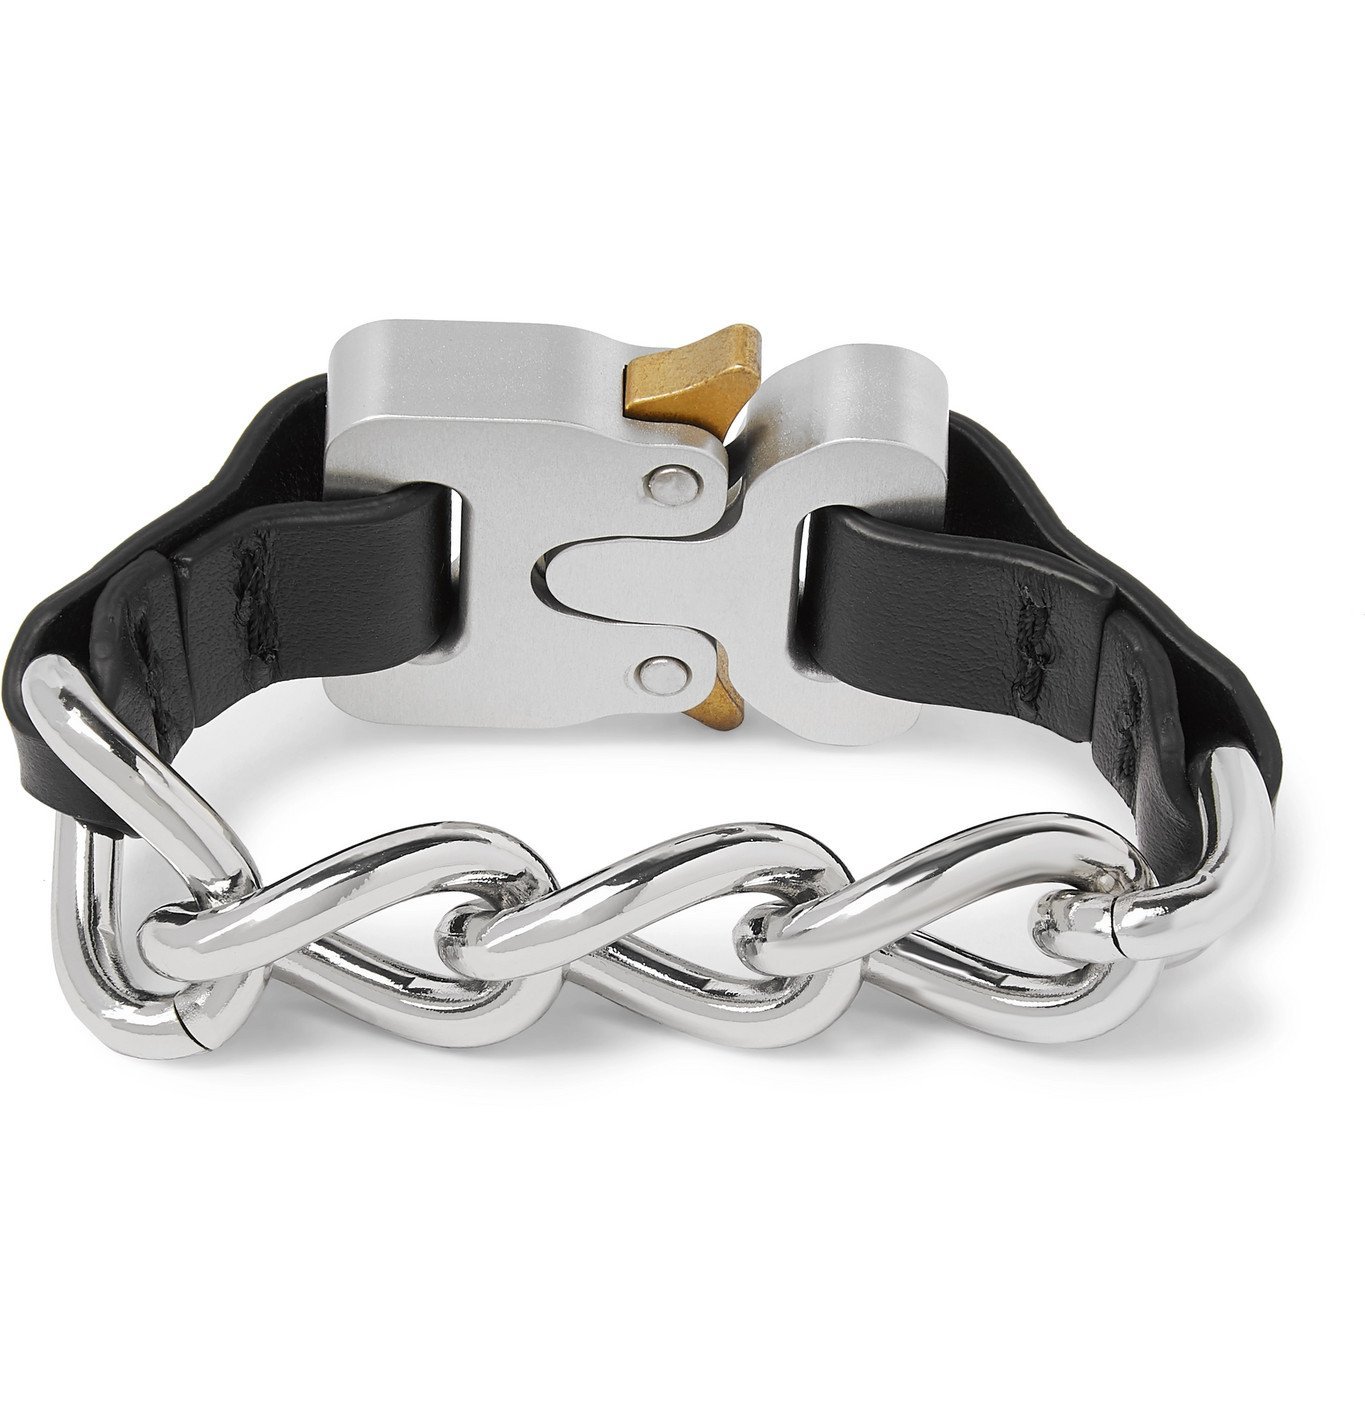 1017 ALYX 9SM - Buckle-Detailed Silver-Tone and Leather Bracelet ...